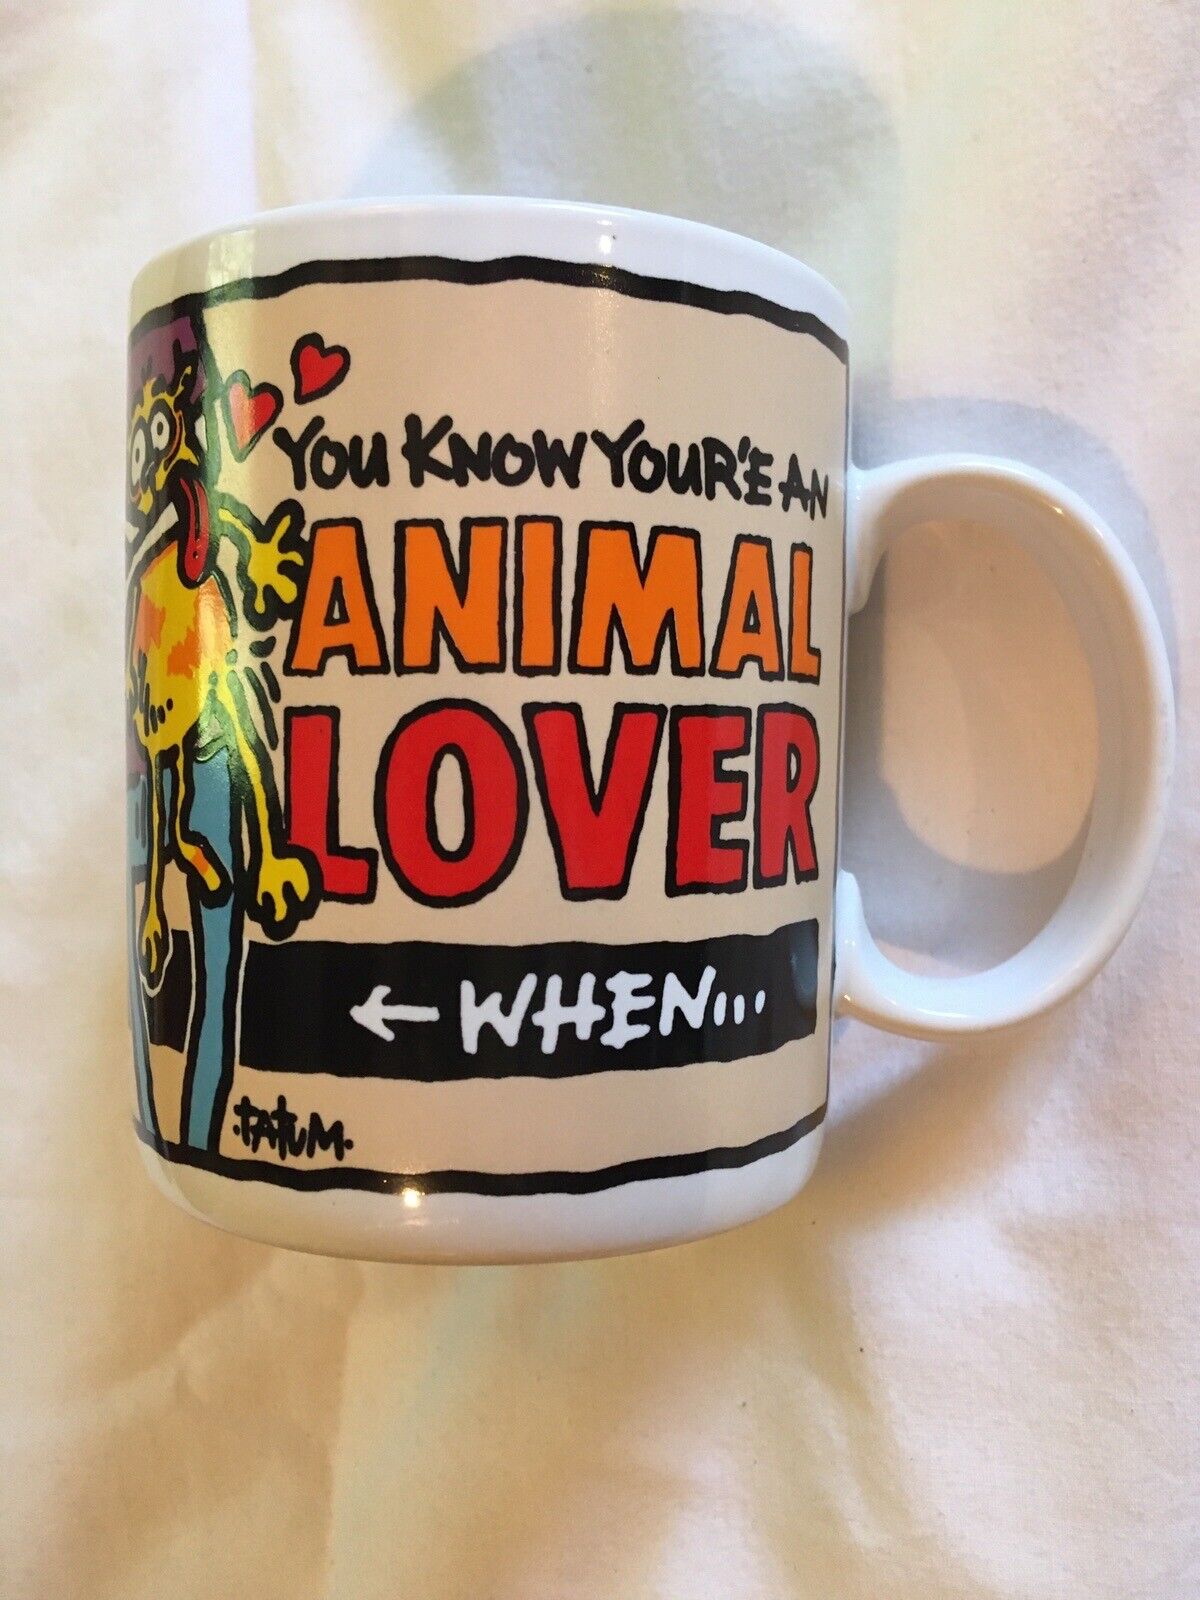 Vintage Funny Humor You Know You’re An Animal Lover Cat Mugs By Ganz